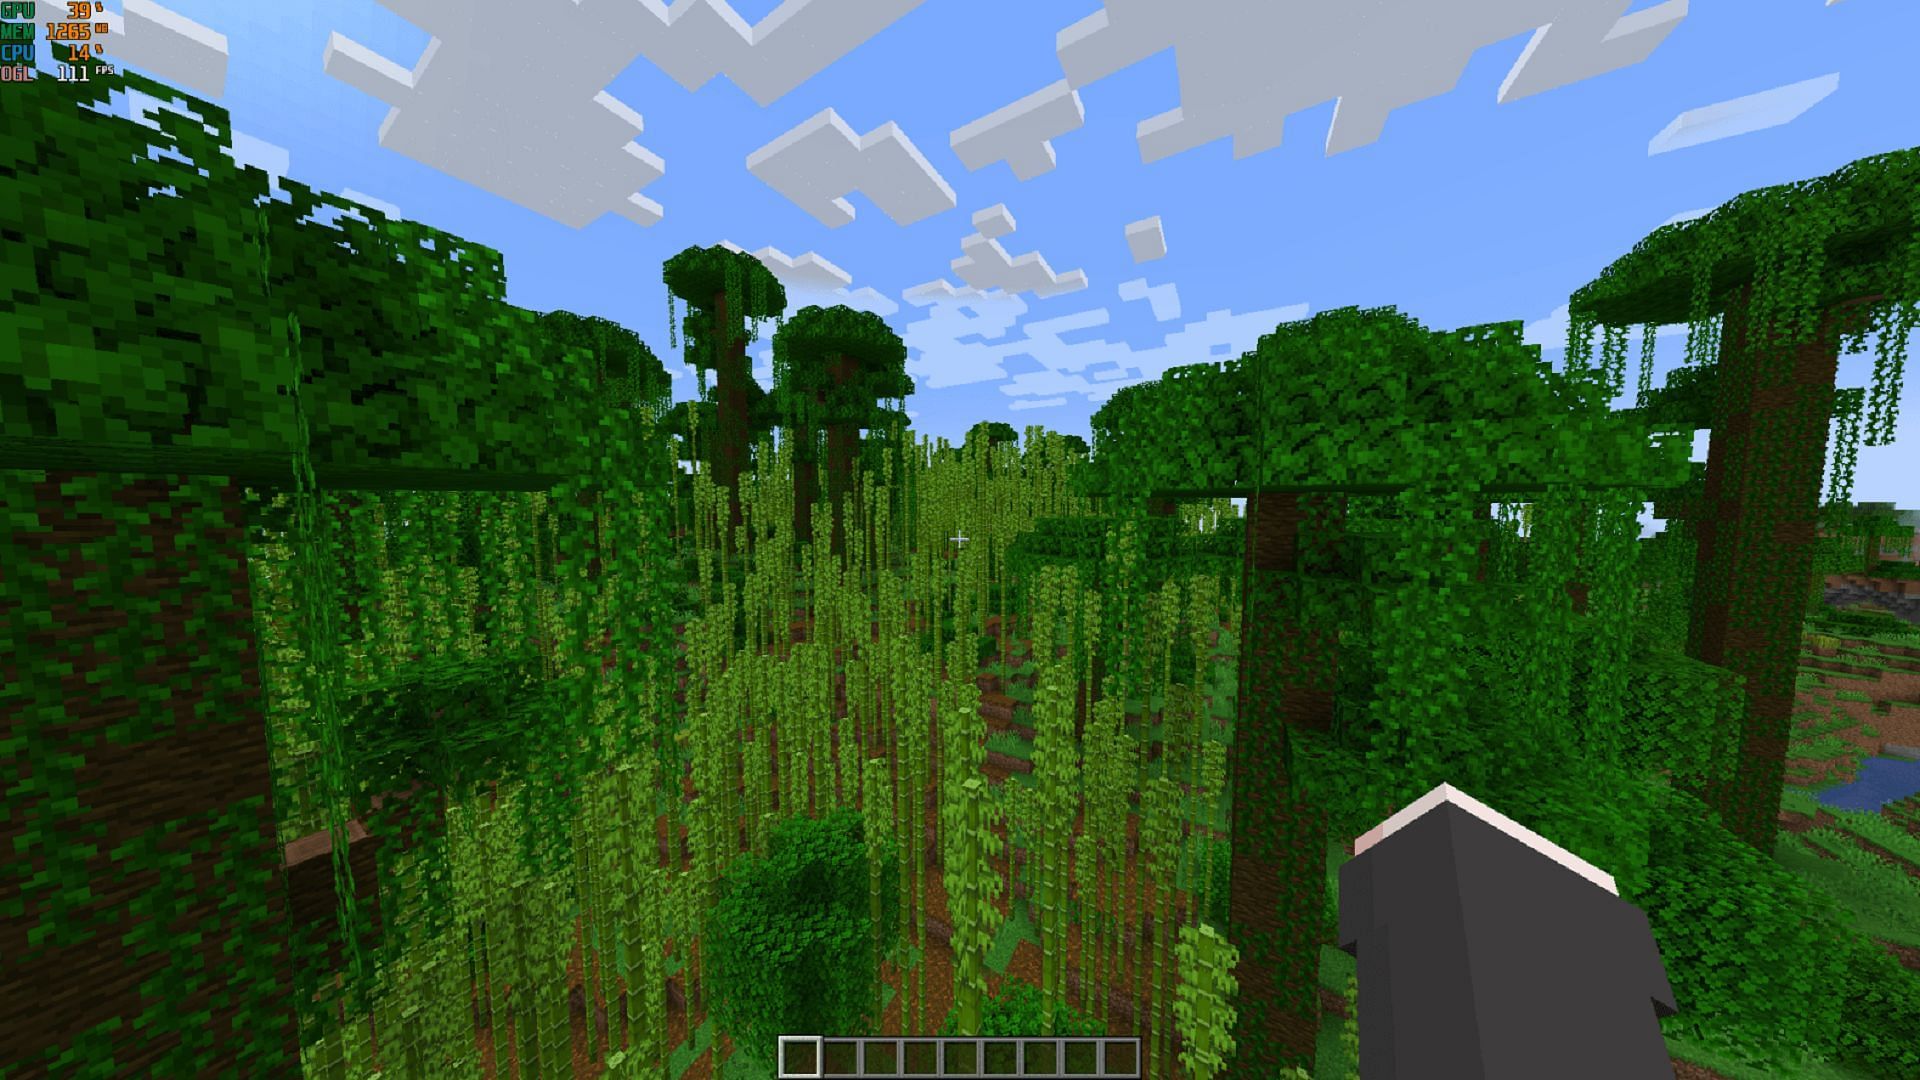 Minecraft&#039;s world rendering within VulkanMod (Image via xCollateral/Modrinth)